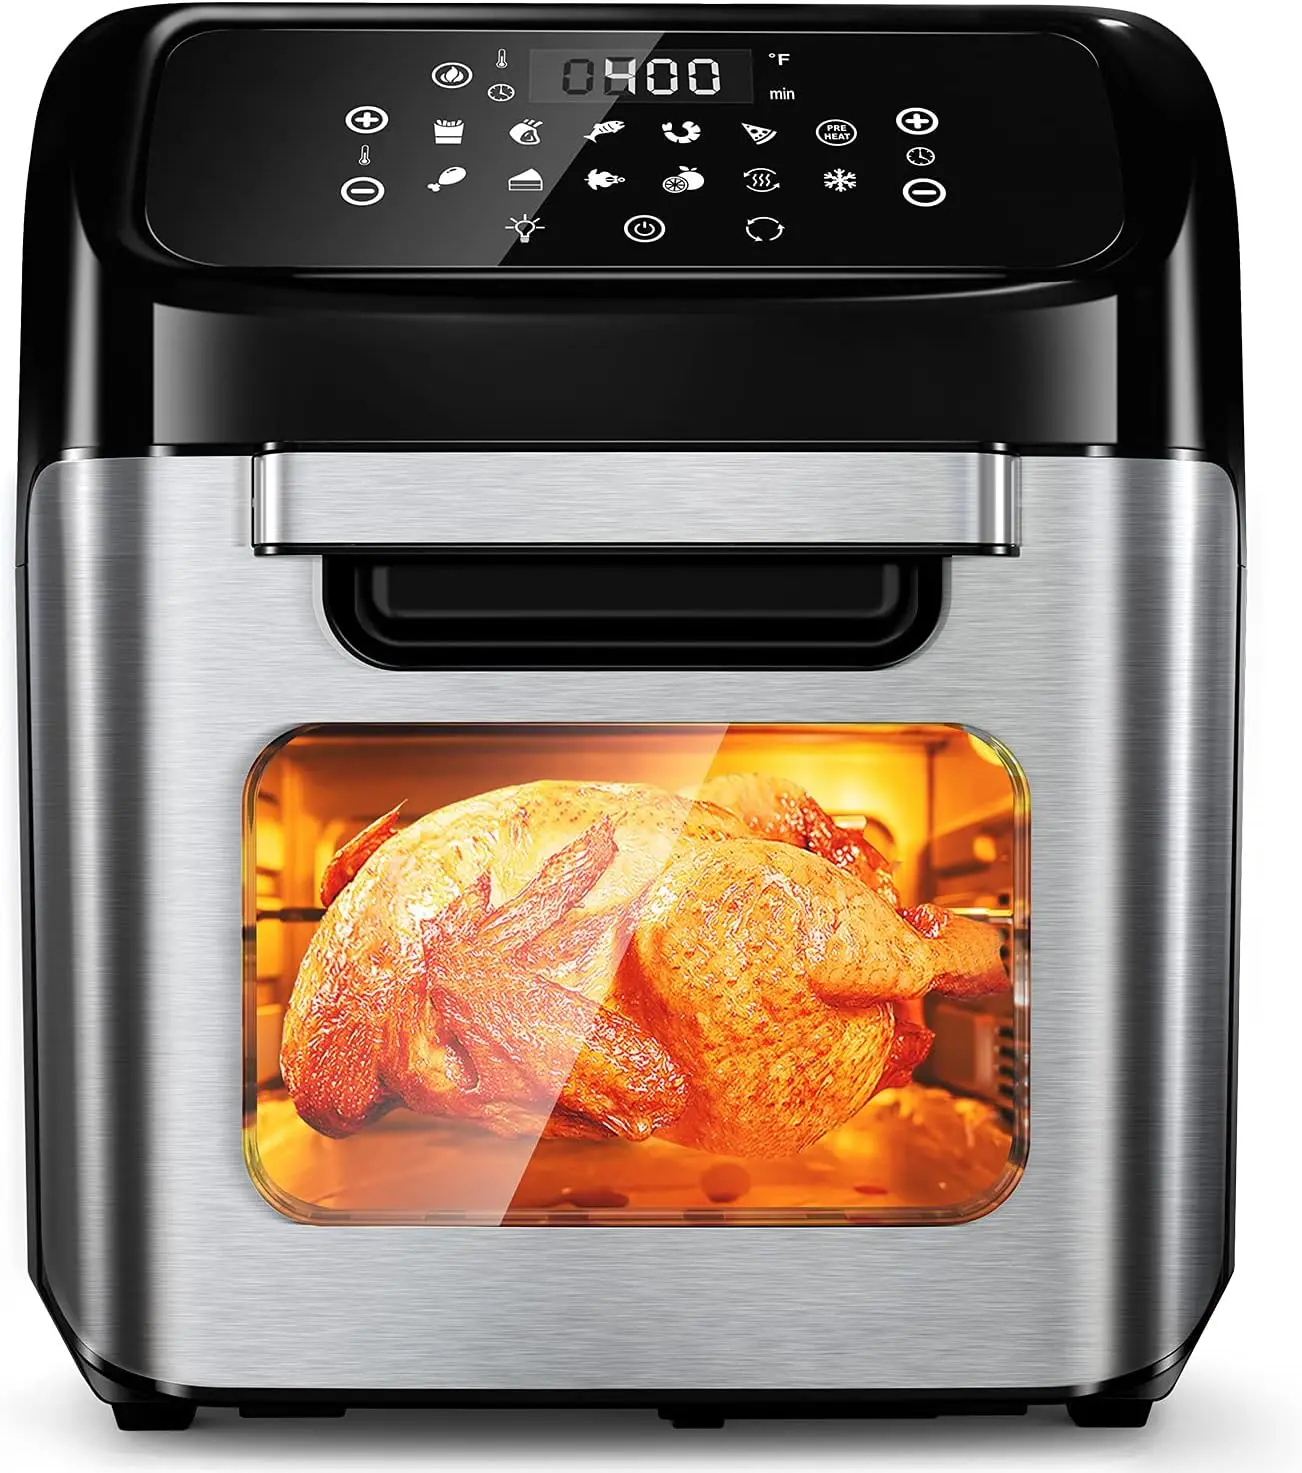 

Fryer, 12 L (12.7 qt) Air fryer Oven with Rotisserie Function, 10 in 1 Hot Oven with 8 Cooking Accessories and Recipe, 1700W Ai